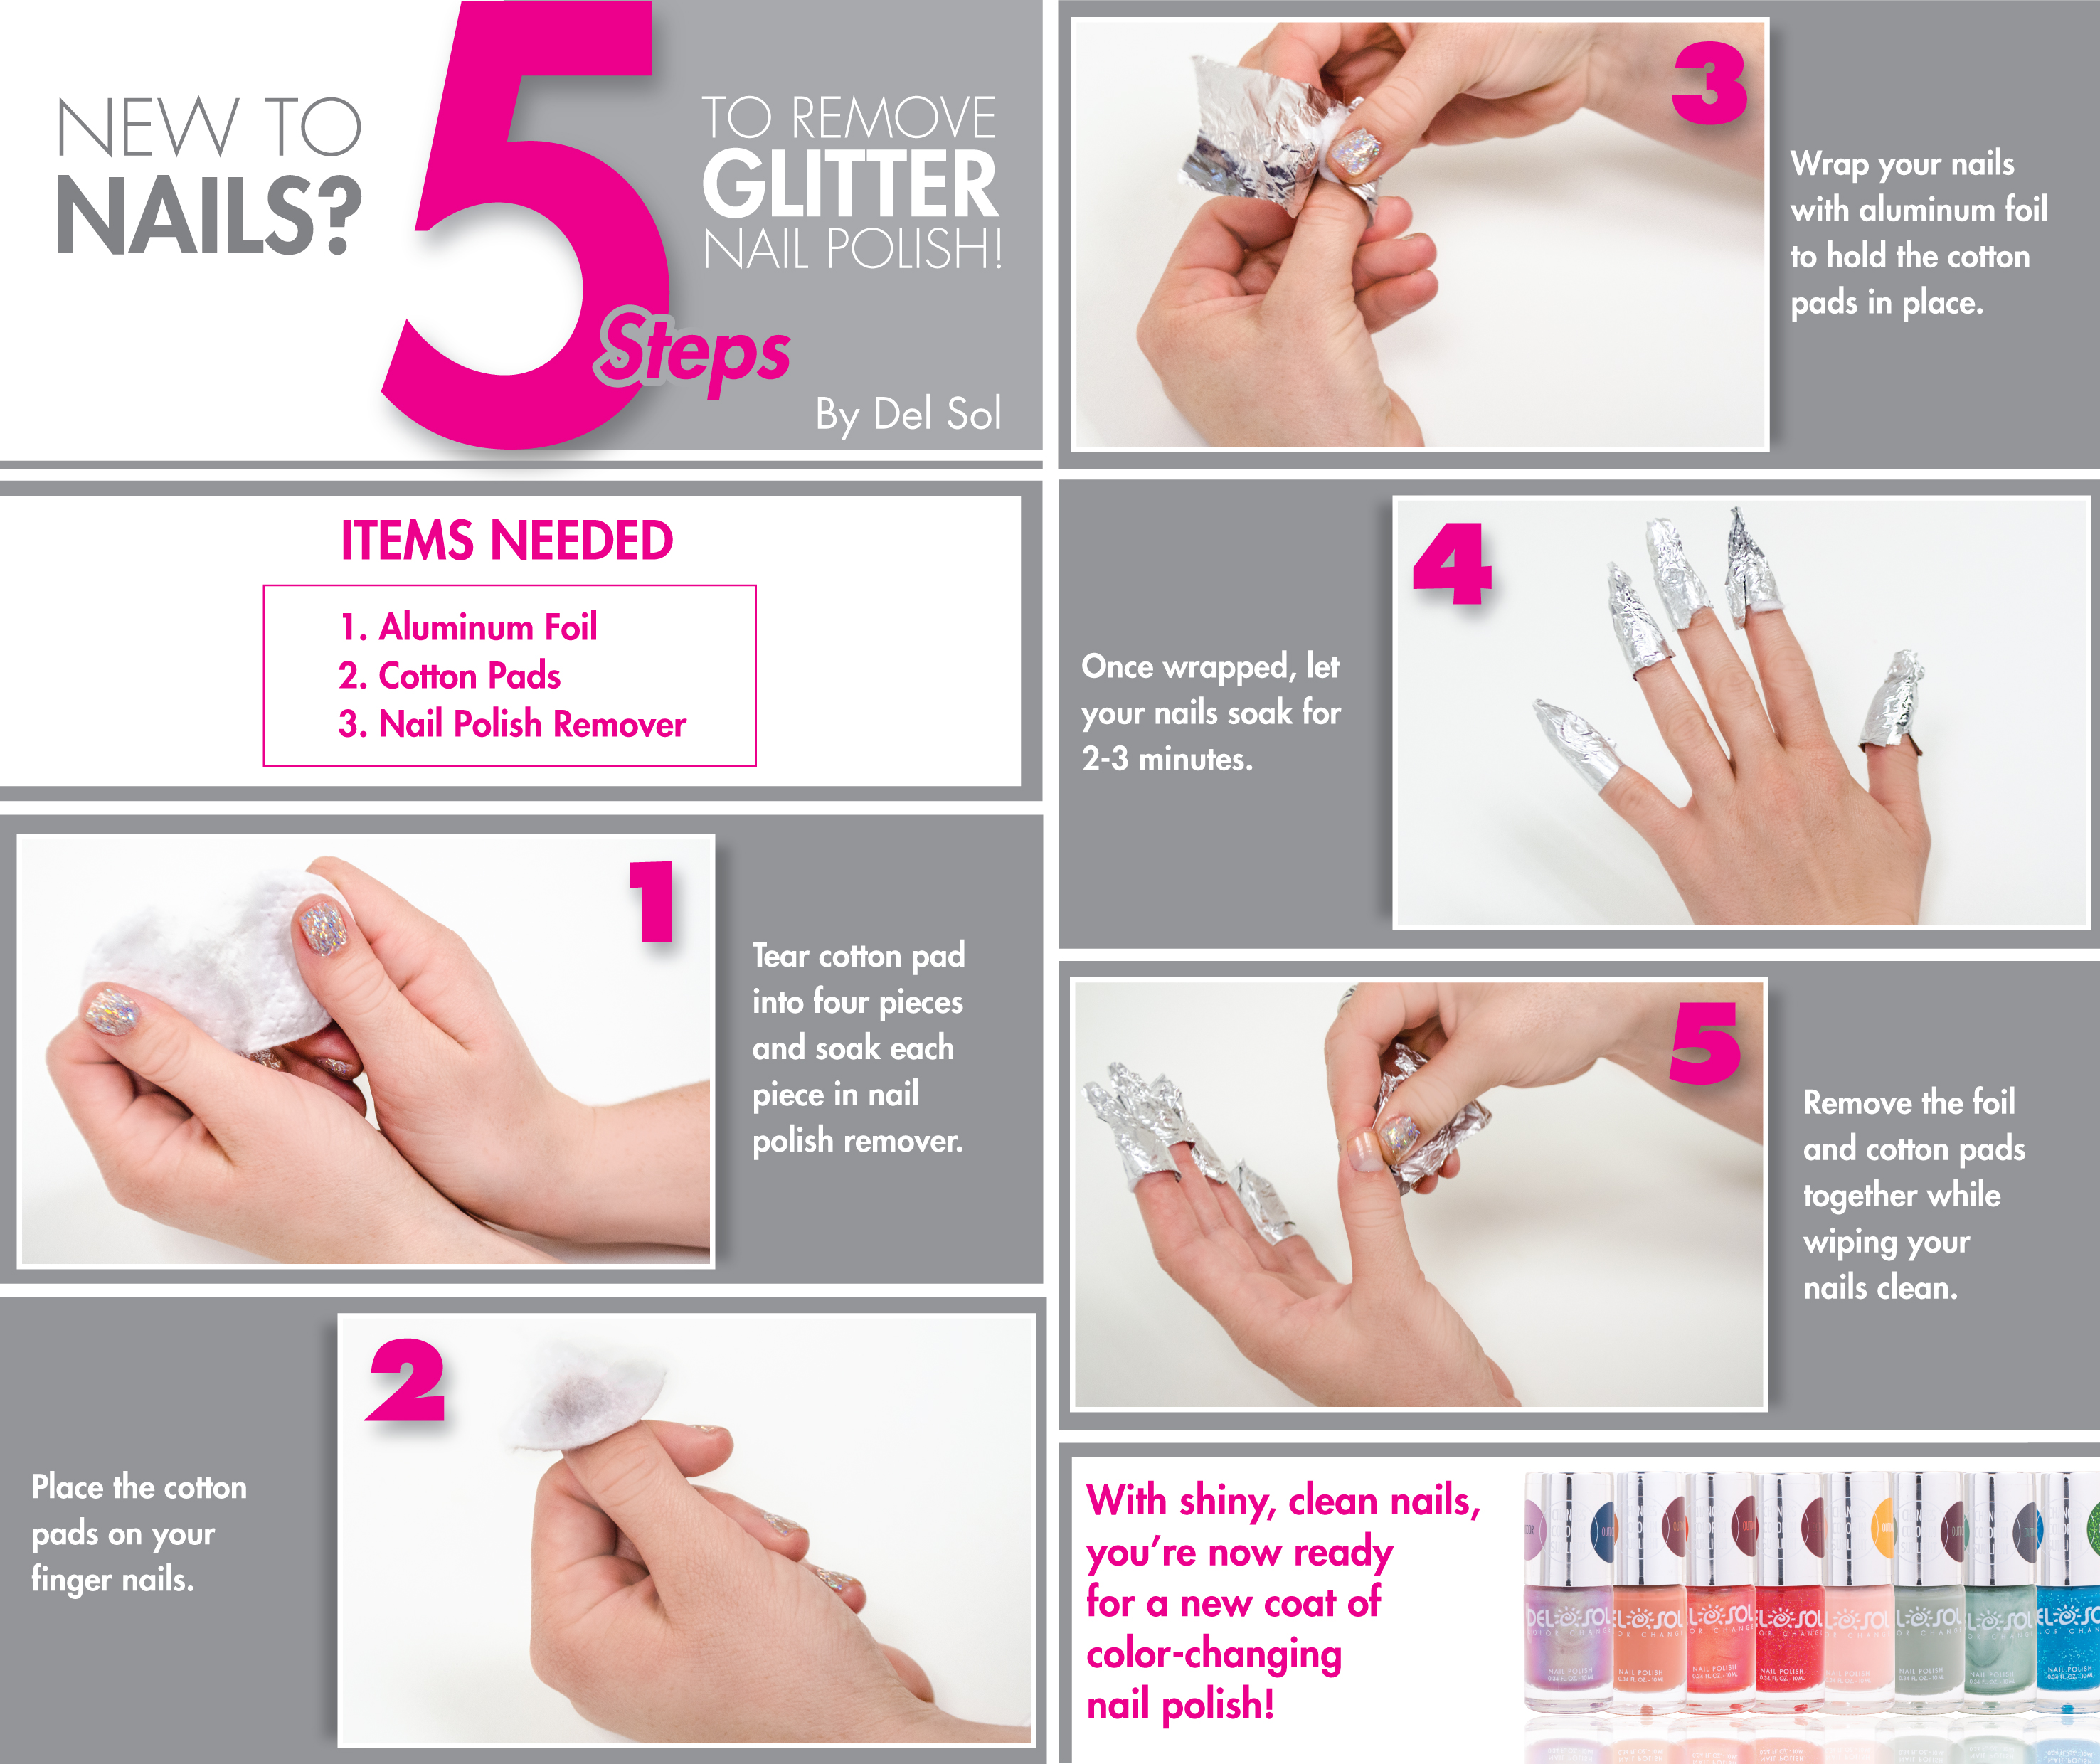 5 Simple Steps for Removing Glitter Nail Polish